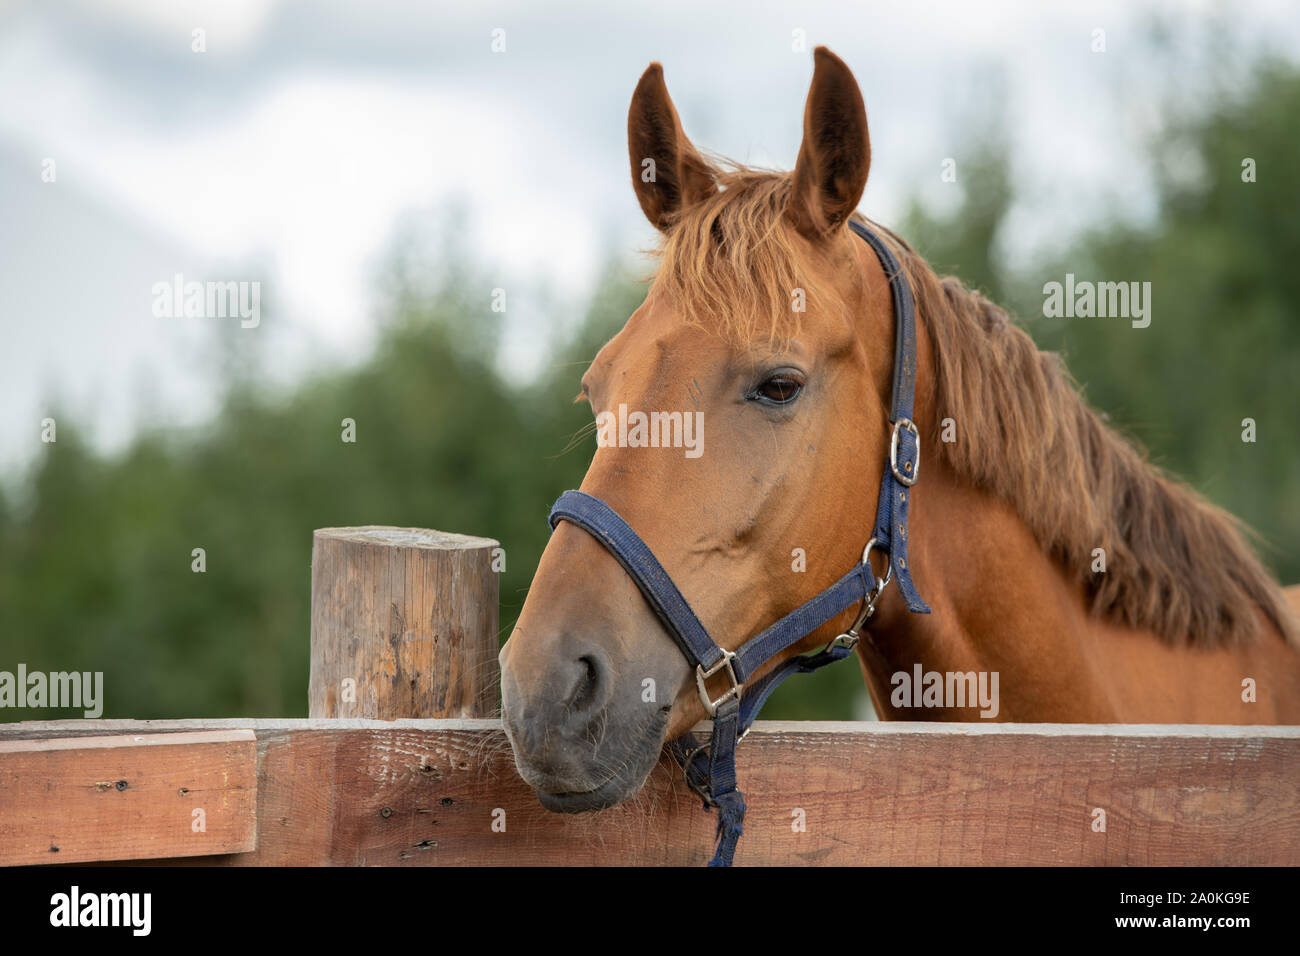 Muzzle of calm purebred brown racehorse by fence in rural environment Stock Photo